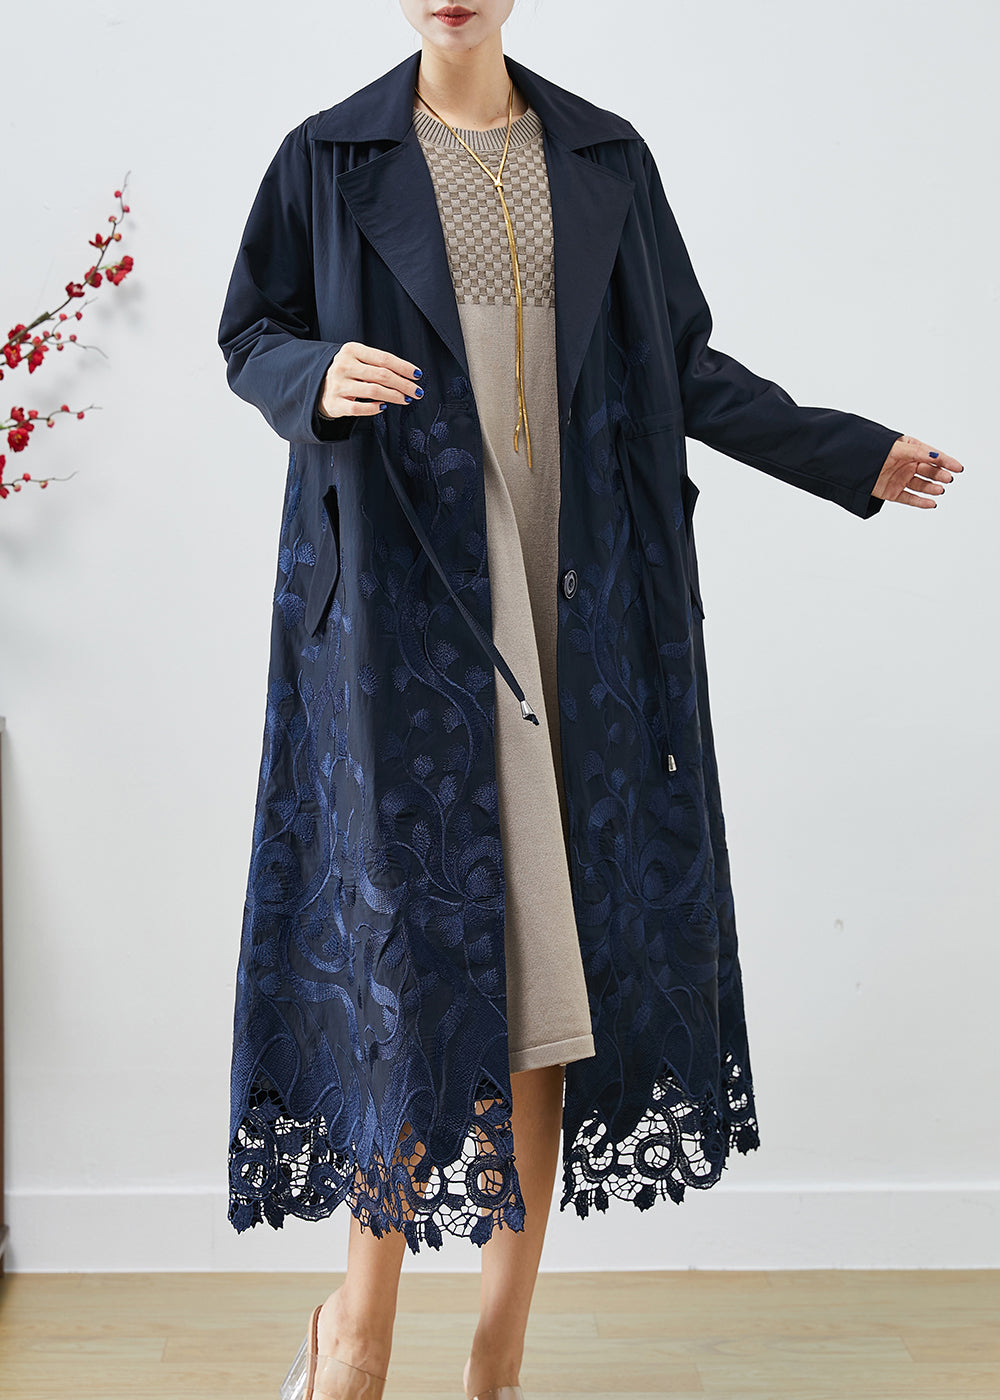 Bohemian Navy Embroideried Tie Waist Spandex Trench Coats Fall